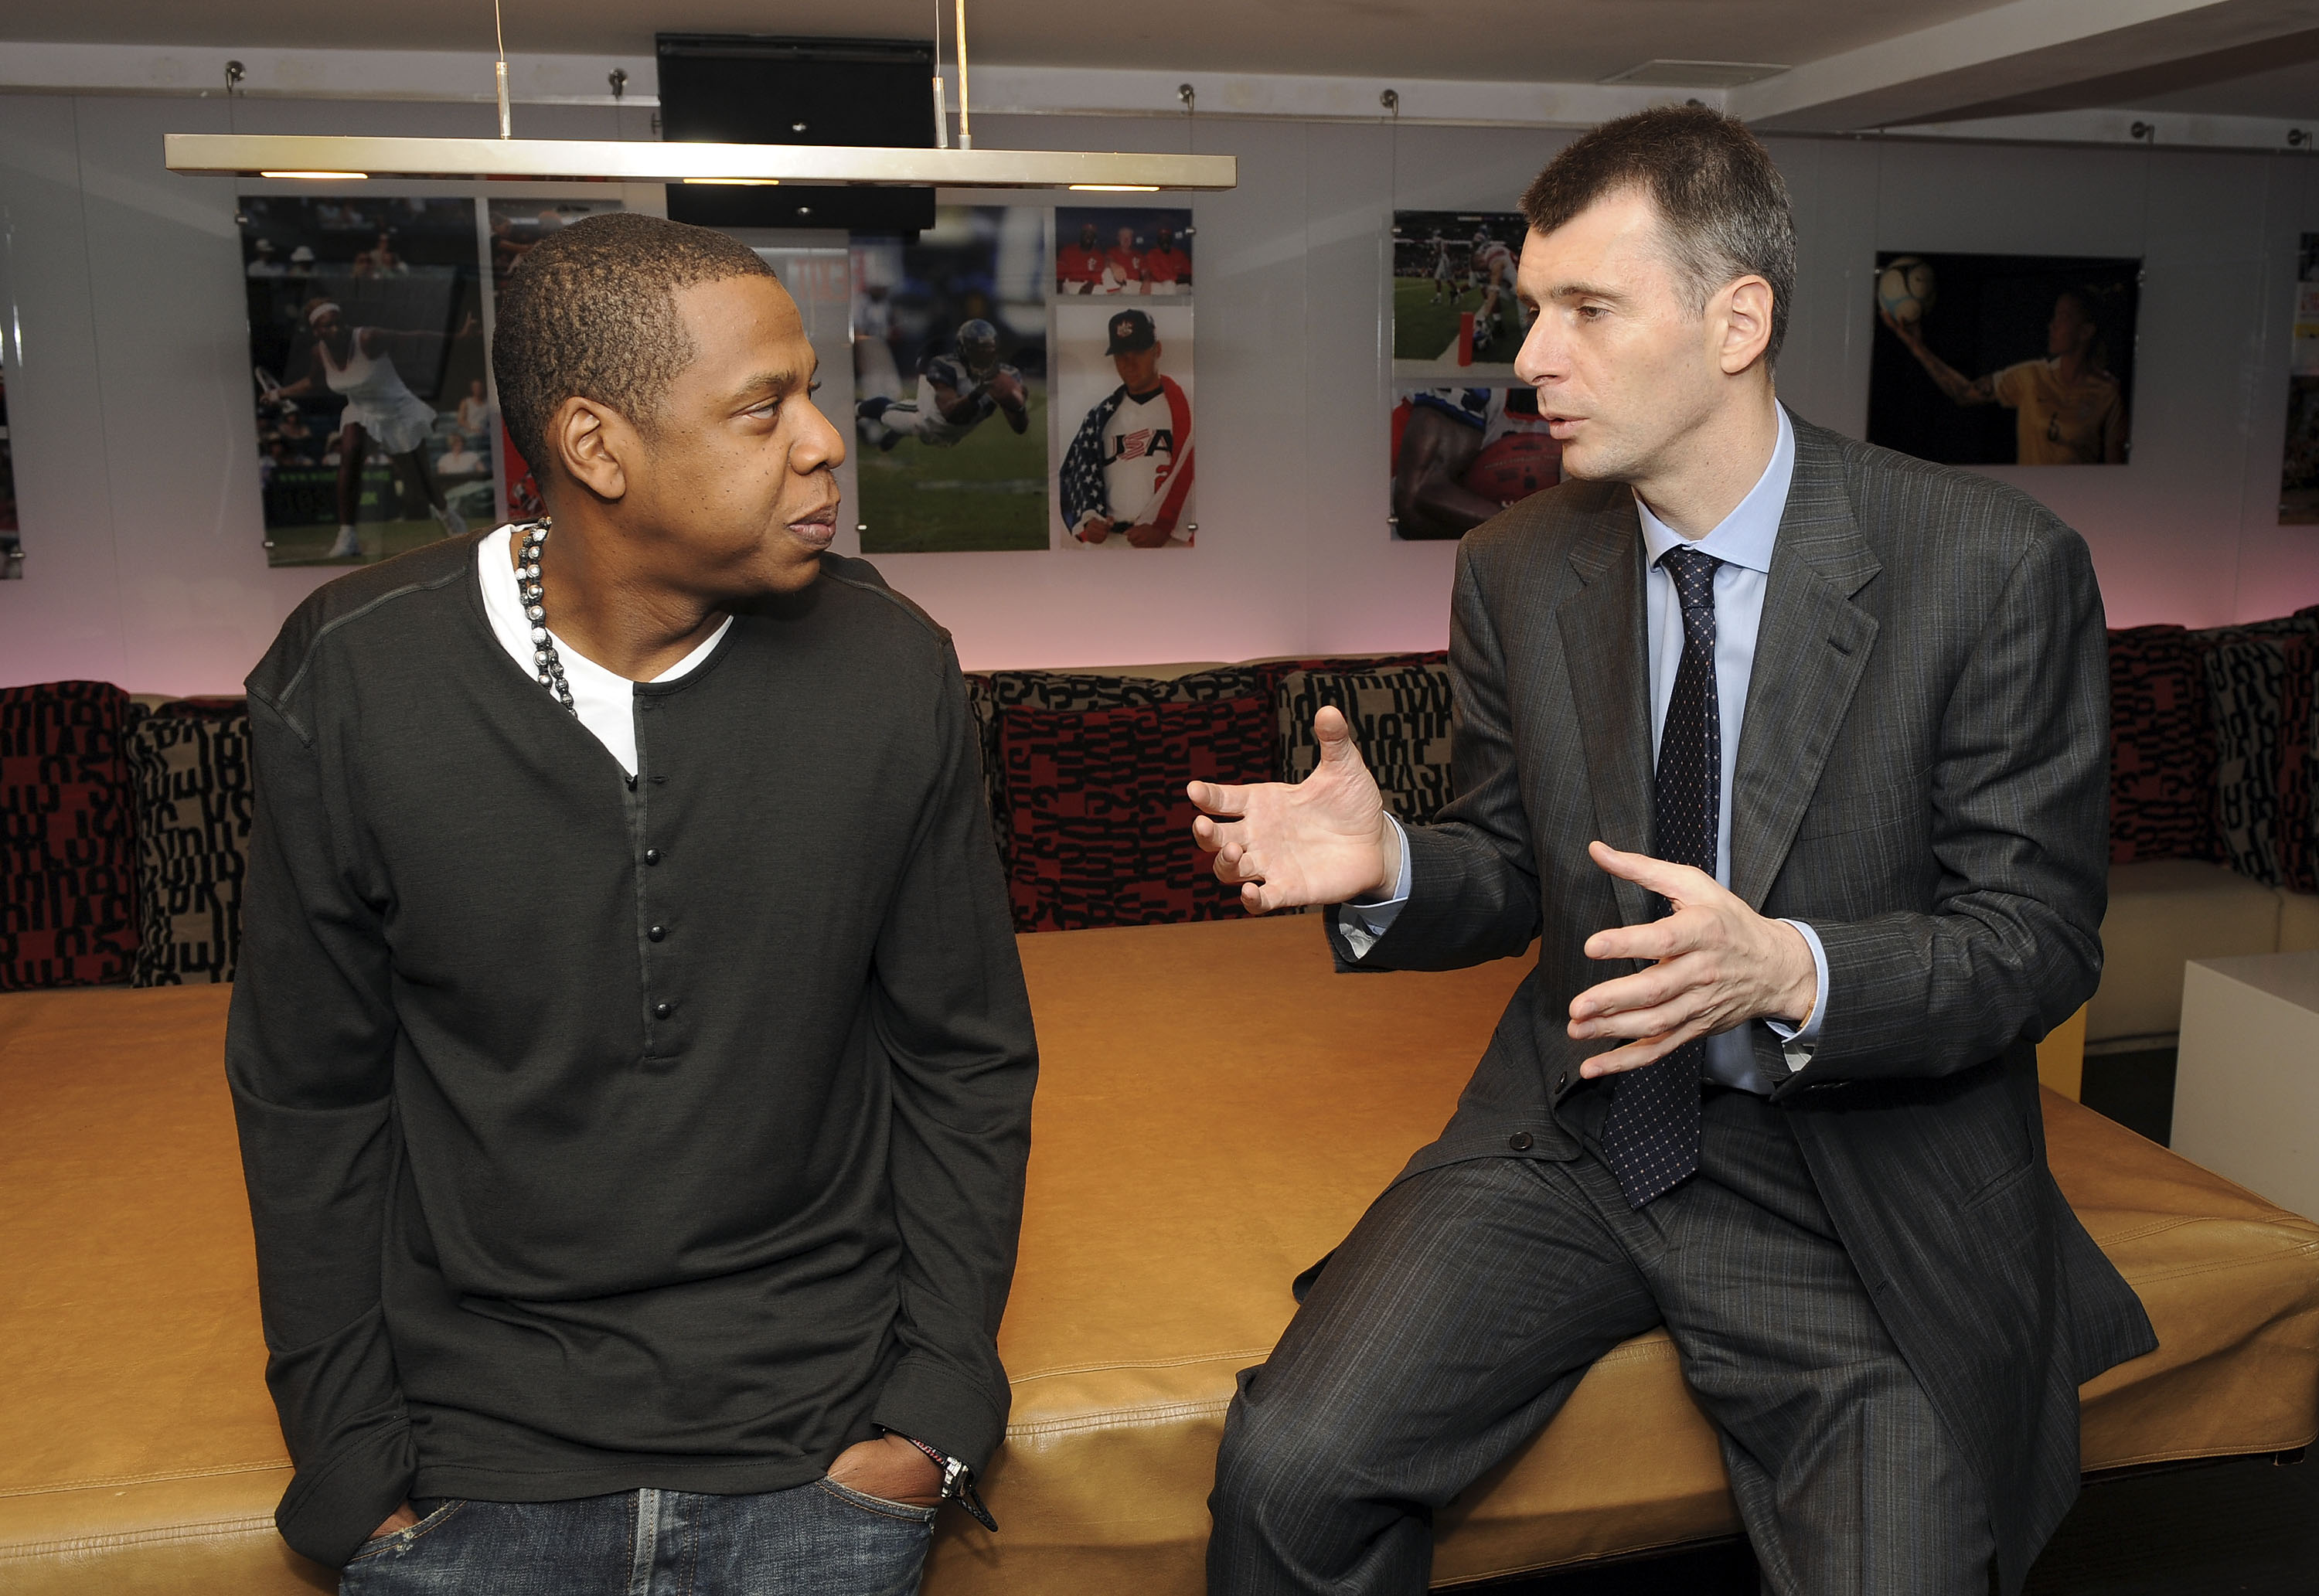 NEW YORK - MAY 18:  (EXCLUSIVE) Cultural icon and Nets investor JAY-Z and Nets owner Mikhail Prokhorov celebrate Prokhorov's purchase of the team at lunch today at JAY-Z's 40/40 club on May 18, 2010 in New York City. Prokhorov is representing the Nets ton